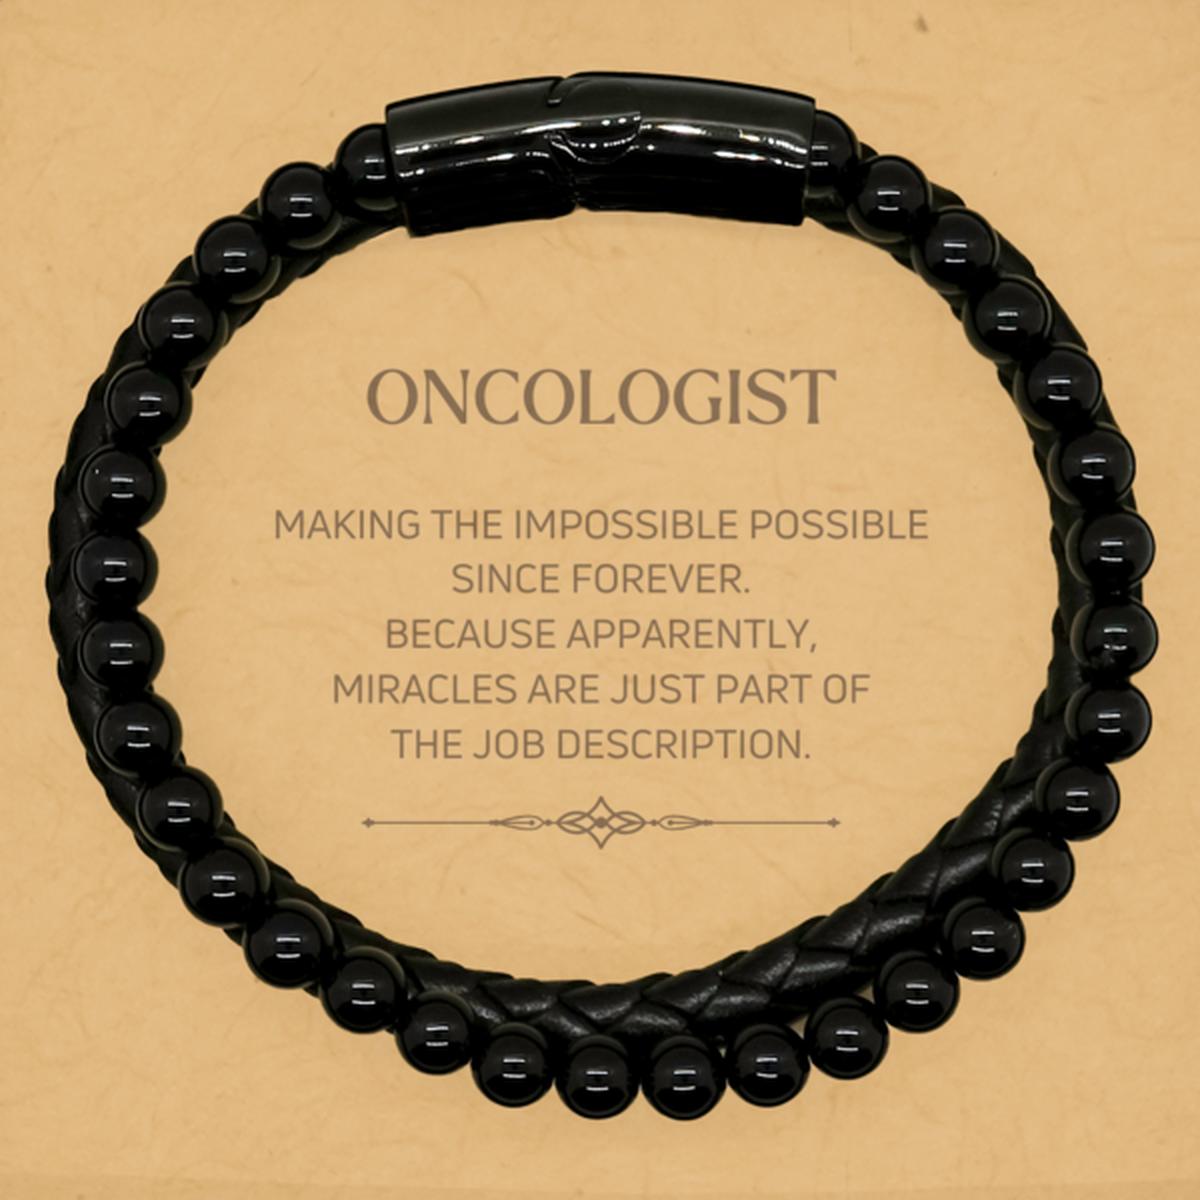 Funny Oncologist Gifts, Miracles are just part of the job description, Inspirational Birthday Stone Leather Bracelets For Oncologist, Men, Women, Coworkers, Friends, Boss